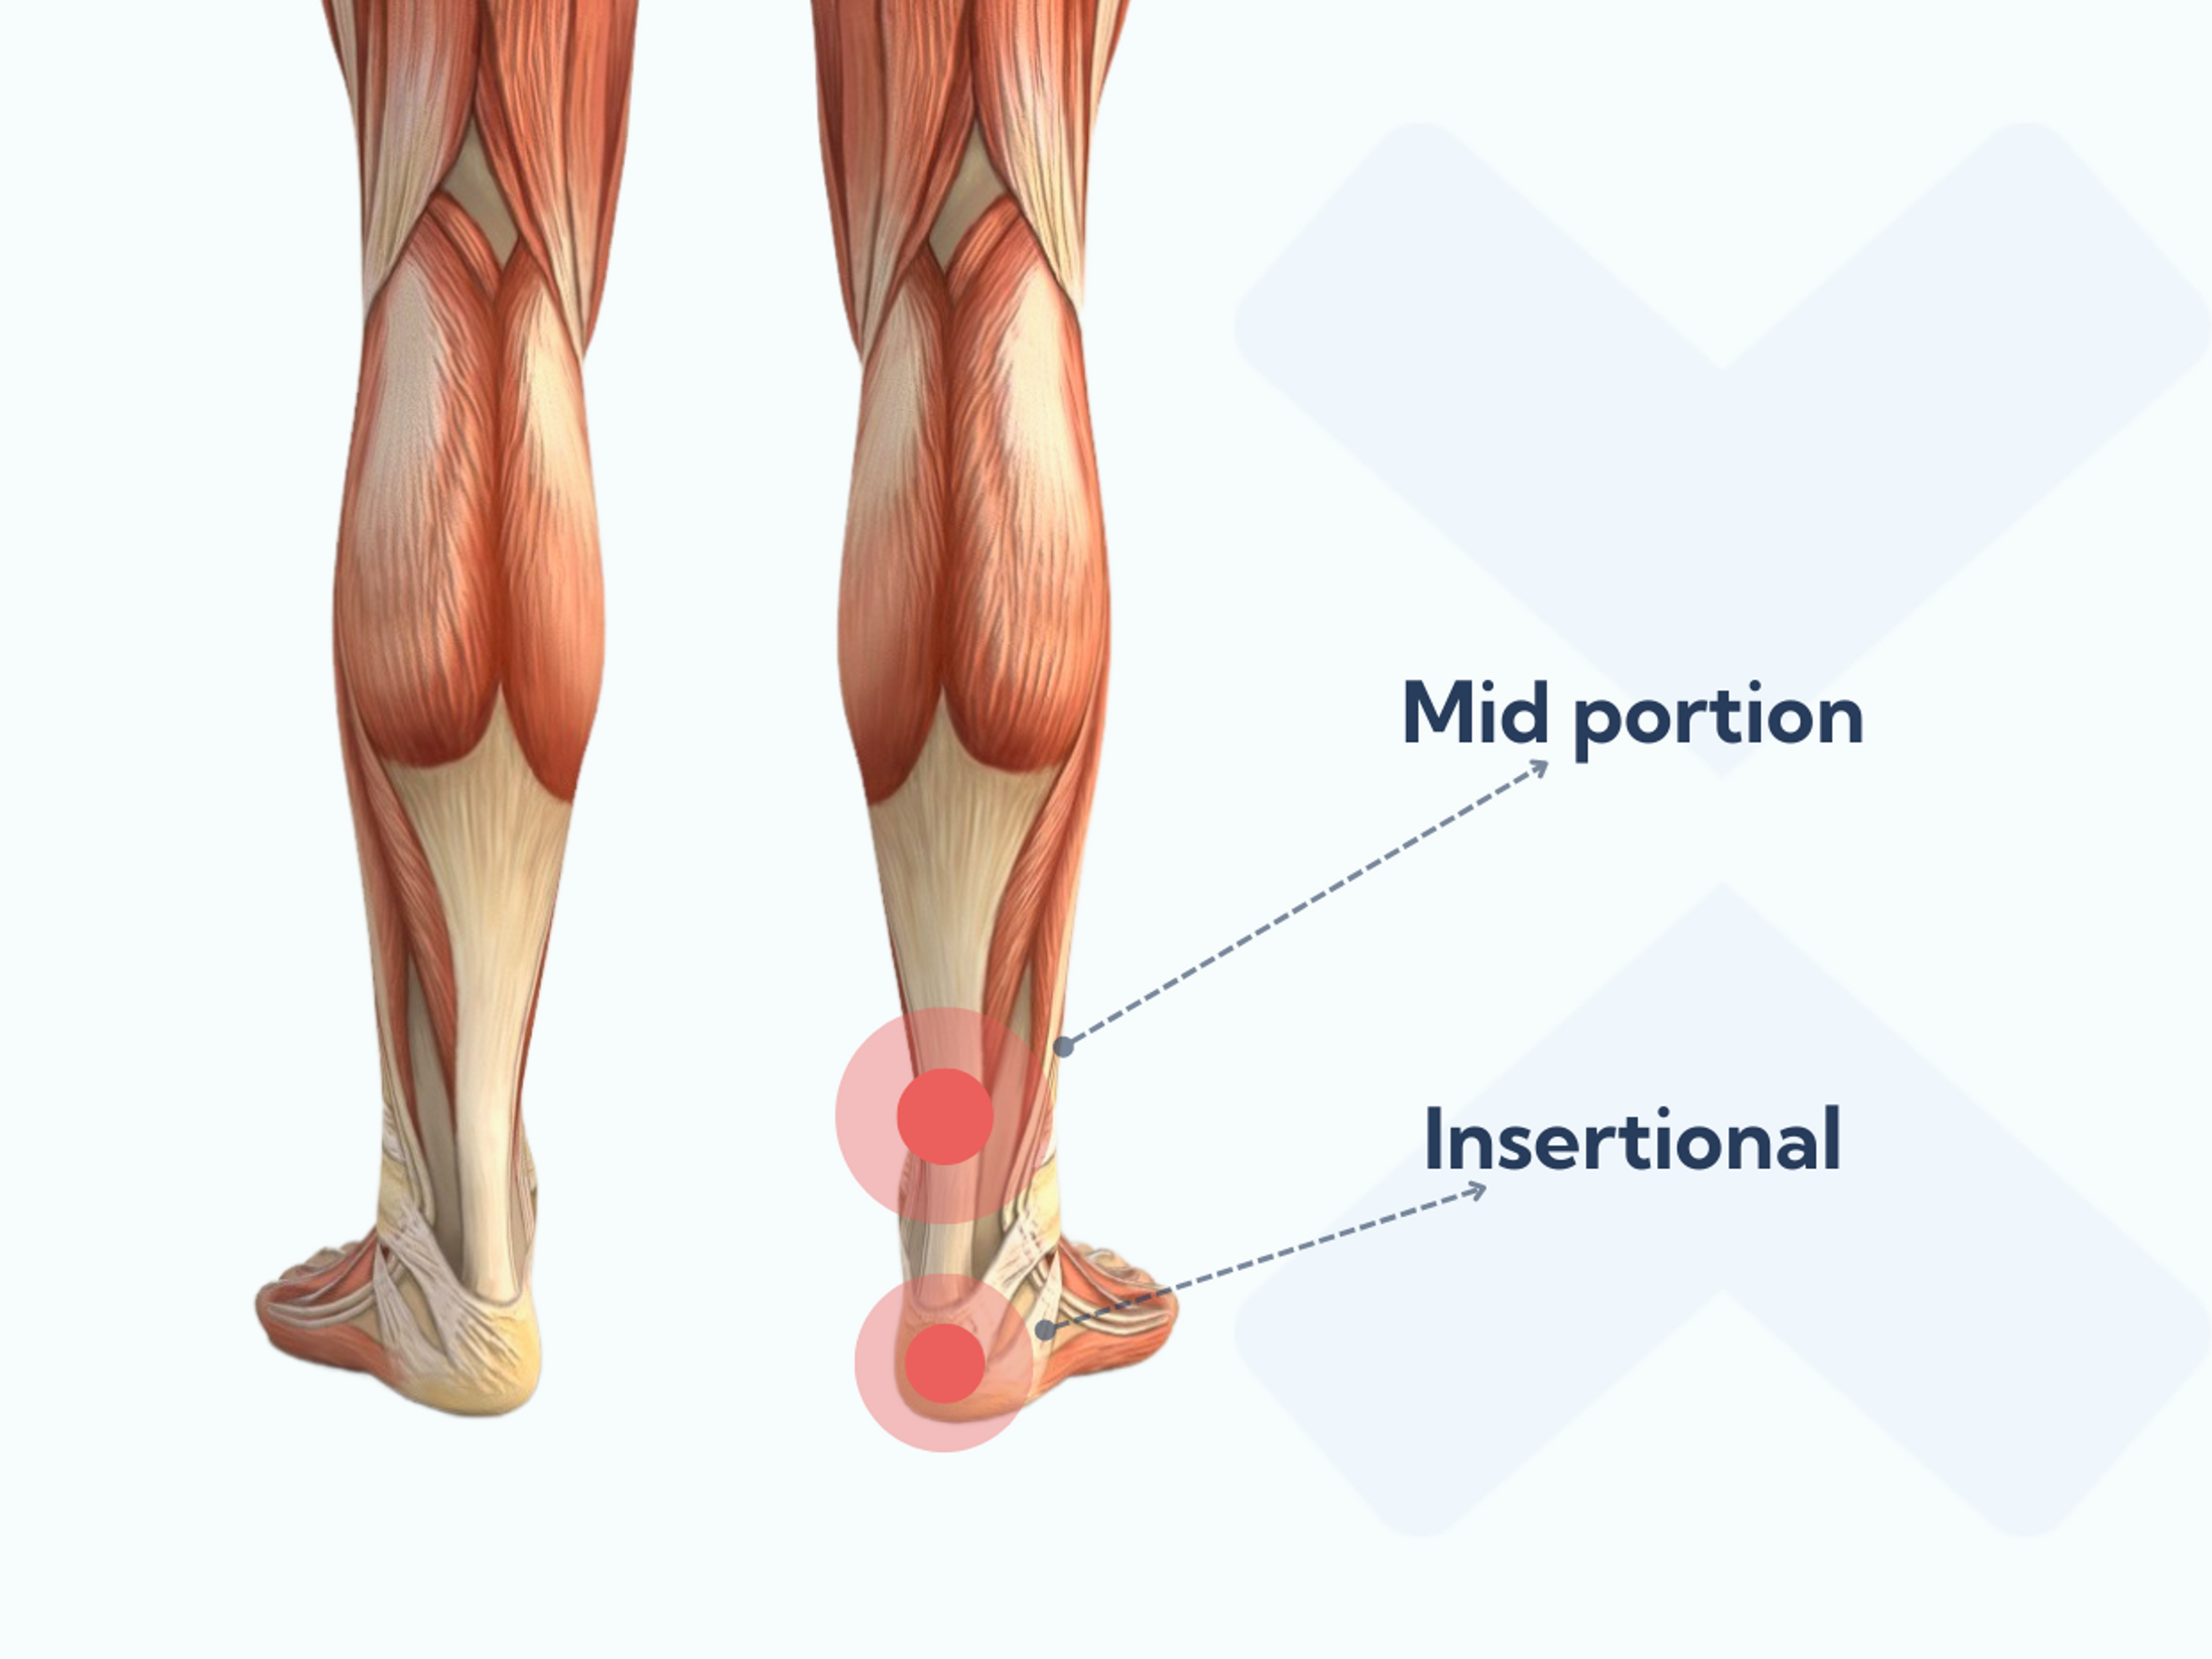 Mid-portion achilles tendonitis develops about 5cm about the heel bone while insertional Achilles tendonitis develops where the tendon attaches into the heel bone.